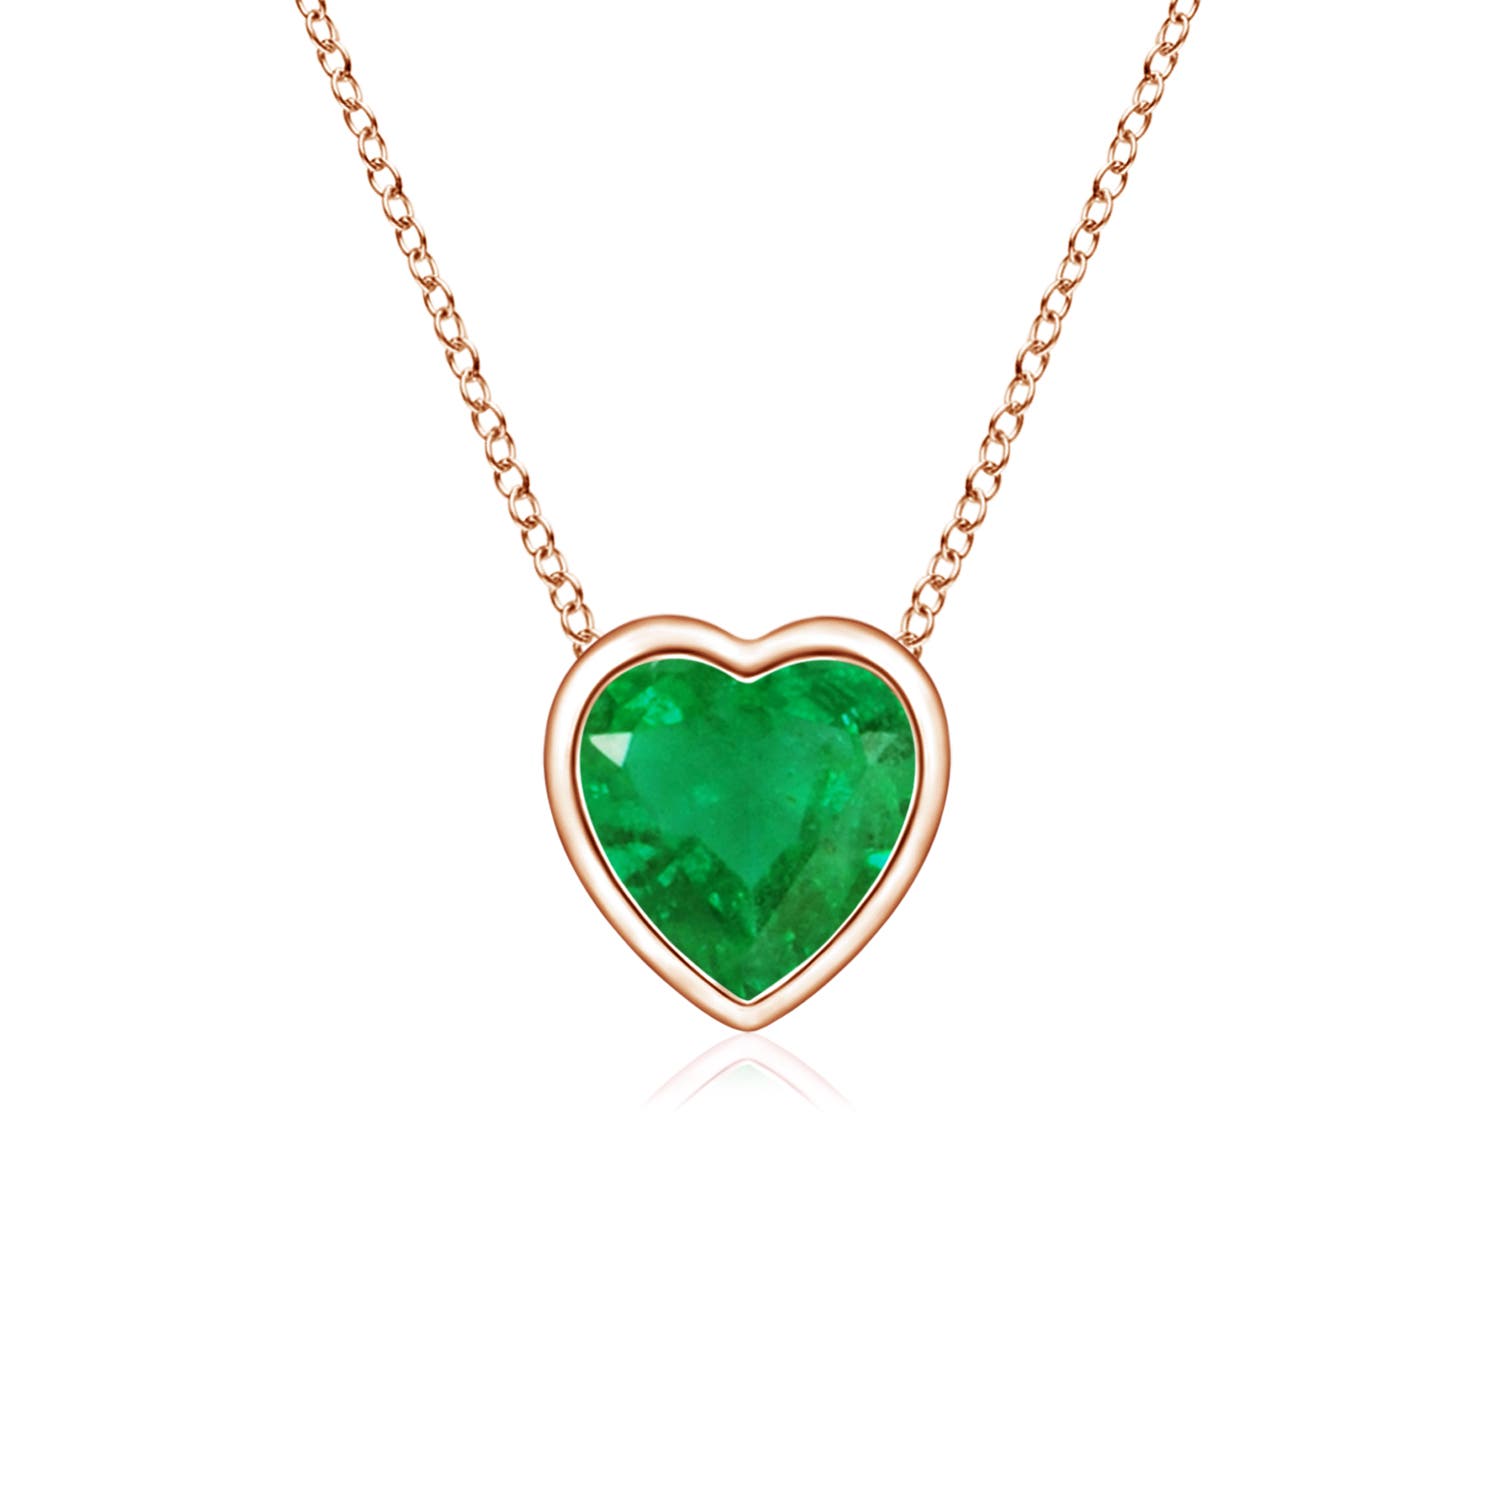 AA - Emerald / 0.2 CT / 14 KT Rose Gold